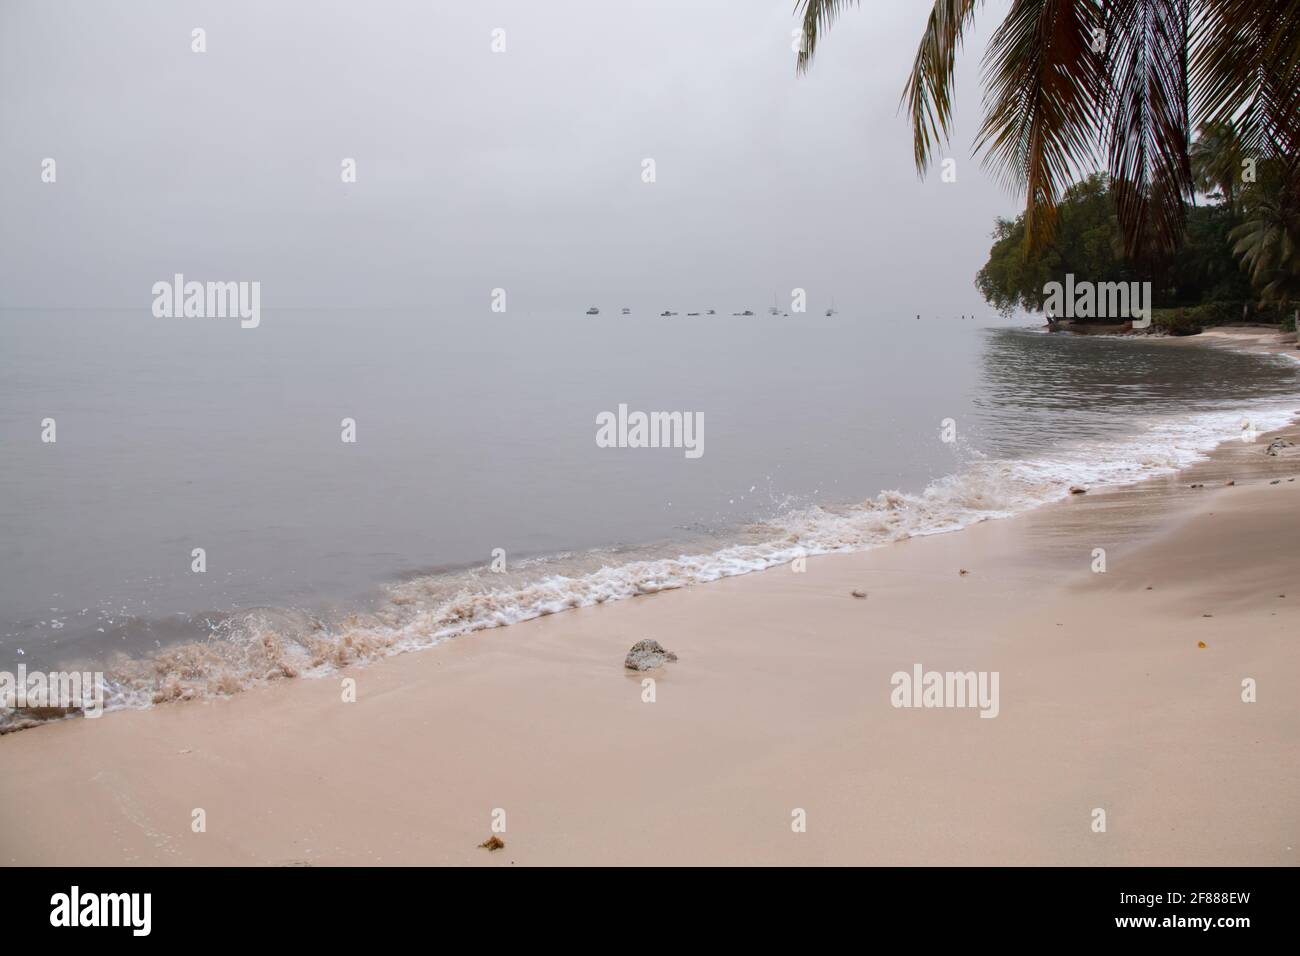 St. James, Barbados - April 10 2021: Thick ash from St. Vincent and the Grenadine's Soufriere volcano eruption turns sky and ocean grey in Barbados. Stock Photo